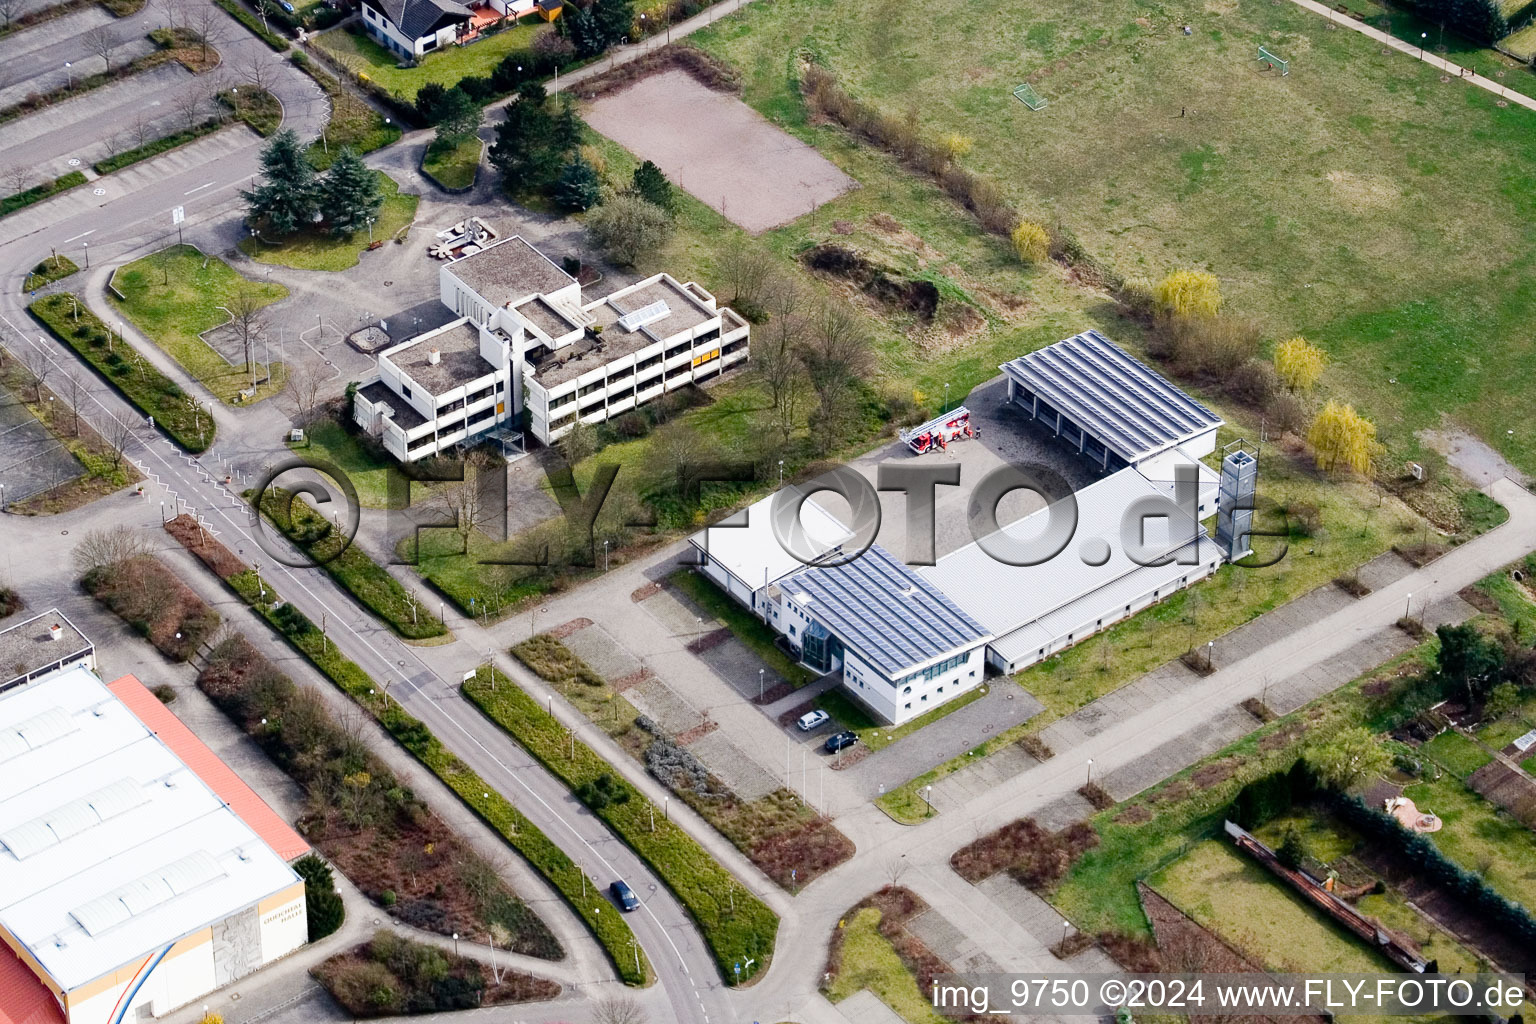 Association of Town Hall in Offenbach an der Queich in the state Rhineland-Palatinate, Germany seen from above